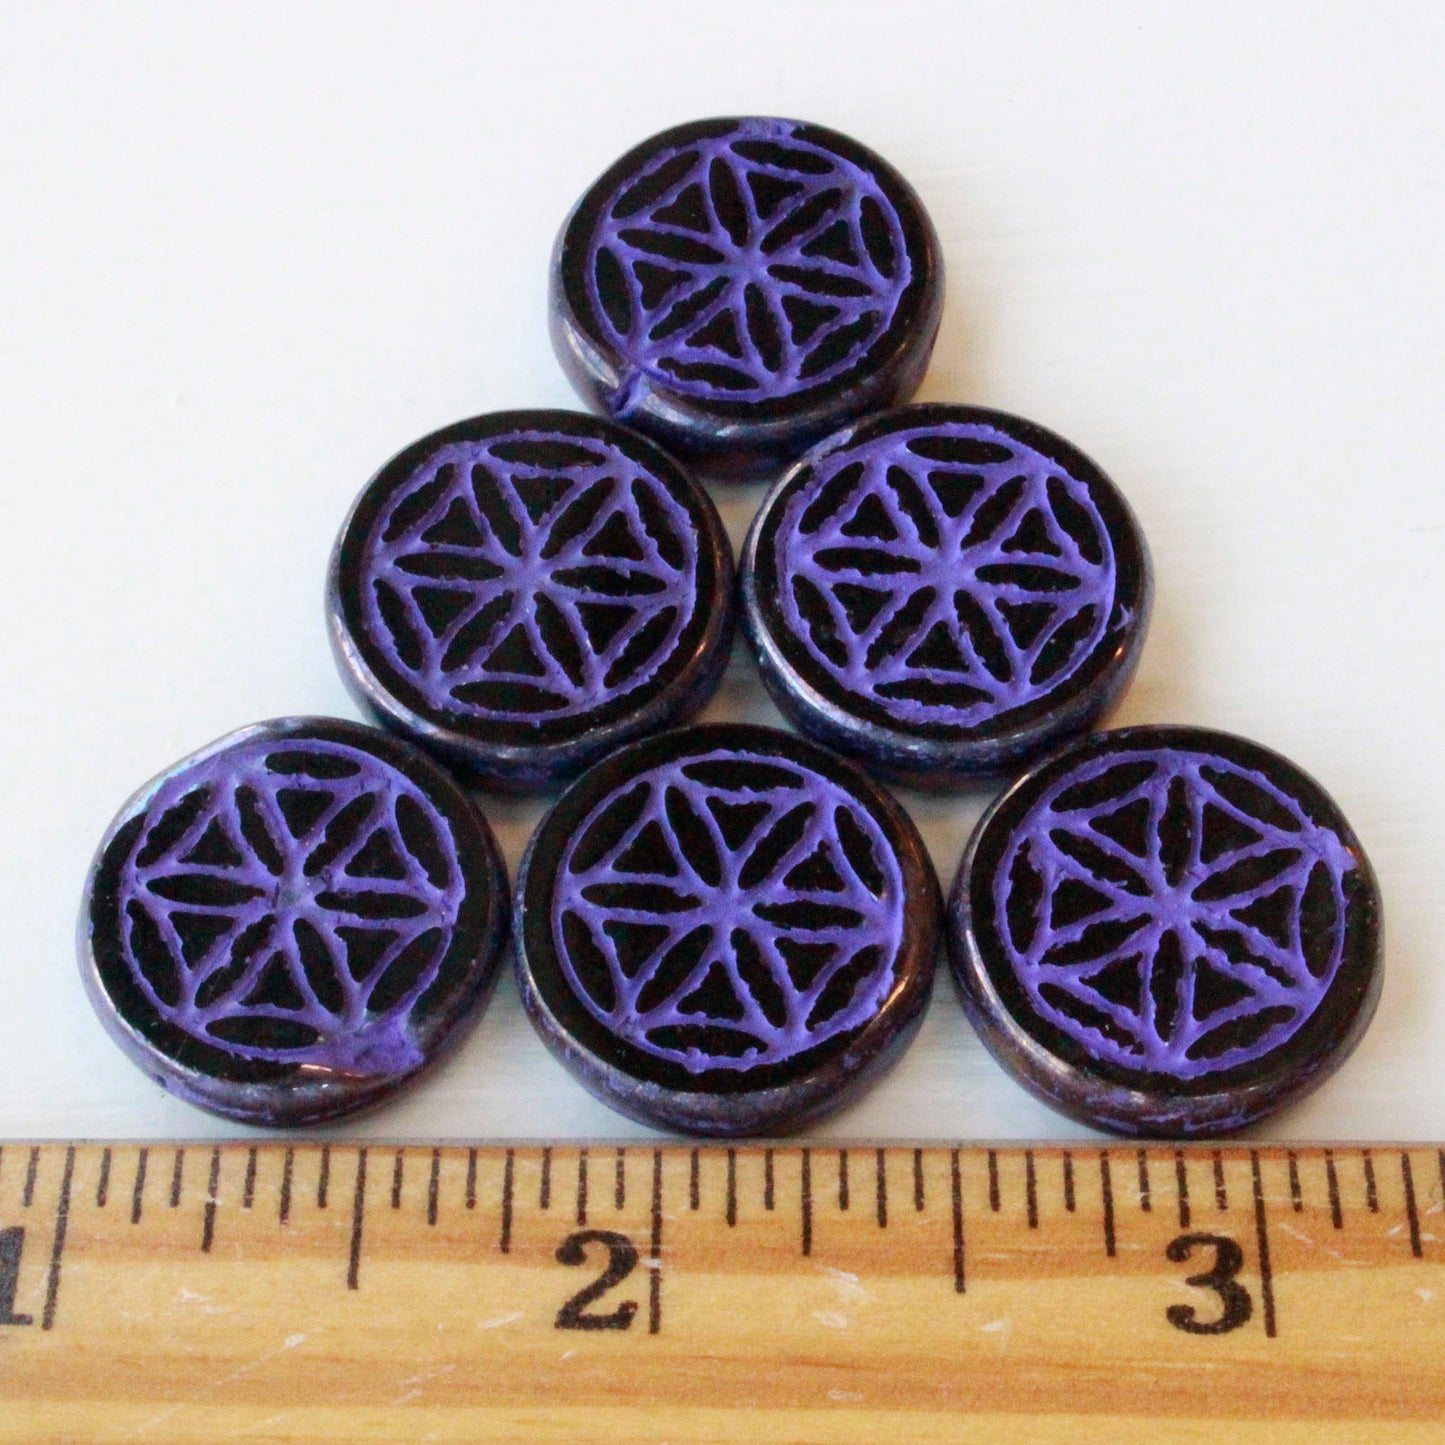 19mm Flower of Life Coin Bead - Black with Purple Wash - Choose Amount